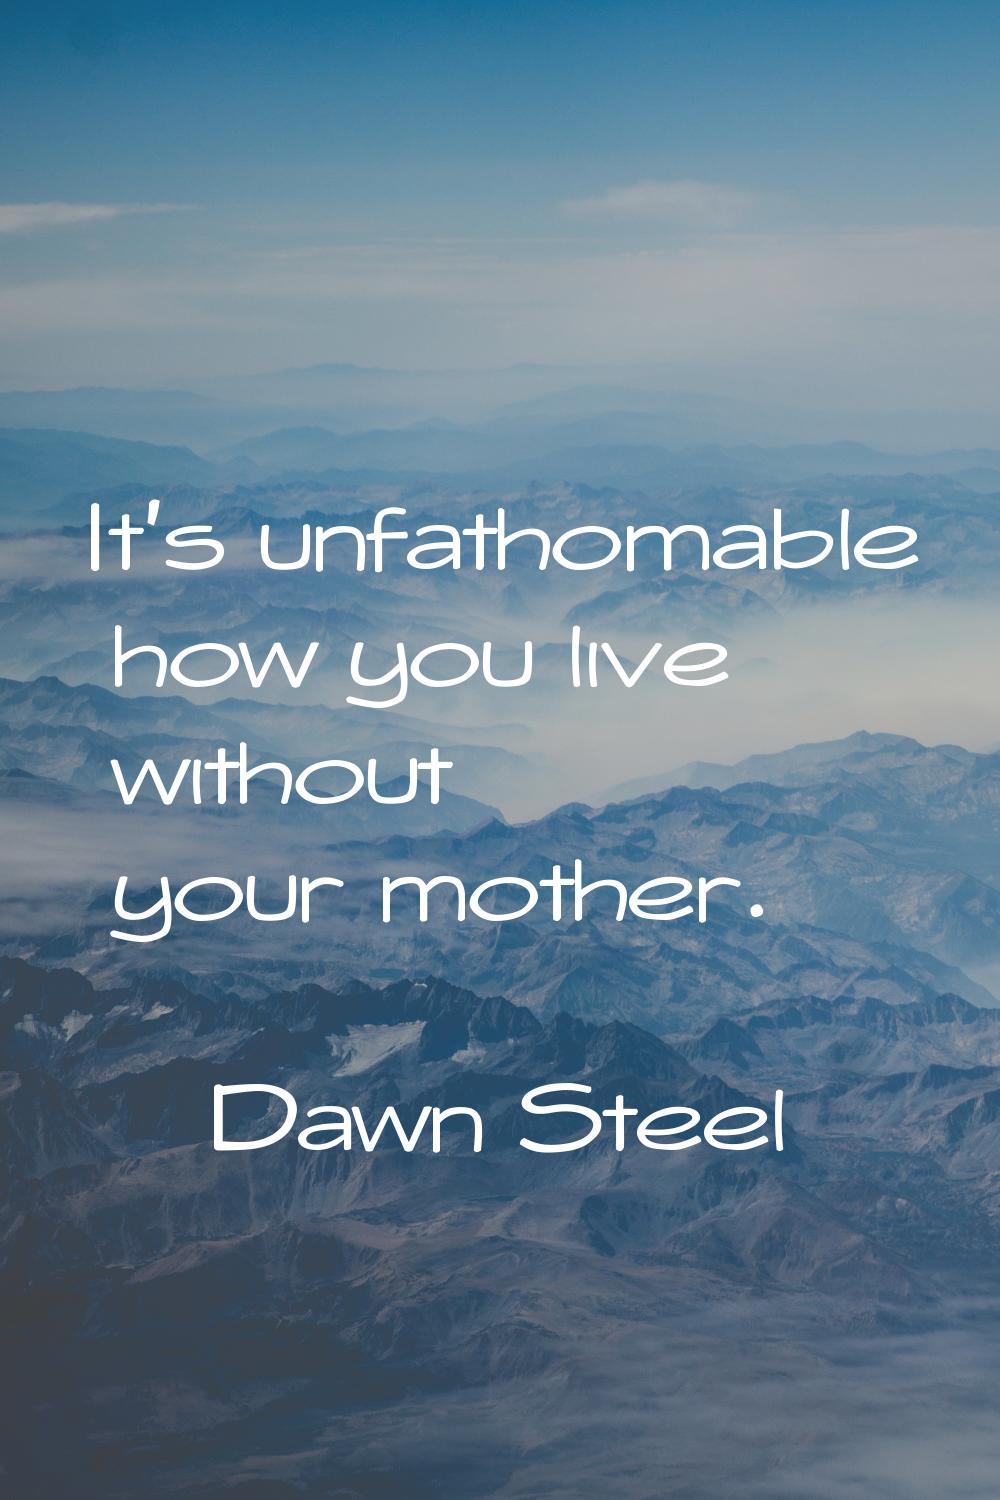 It's unfathomable how you live without your mother.